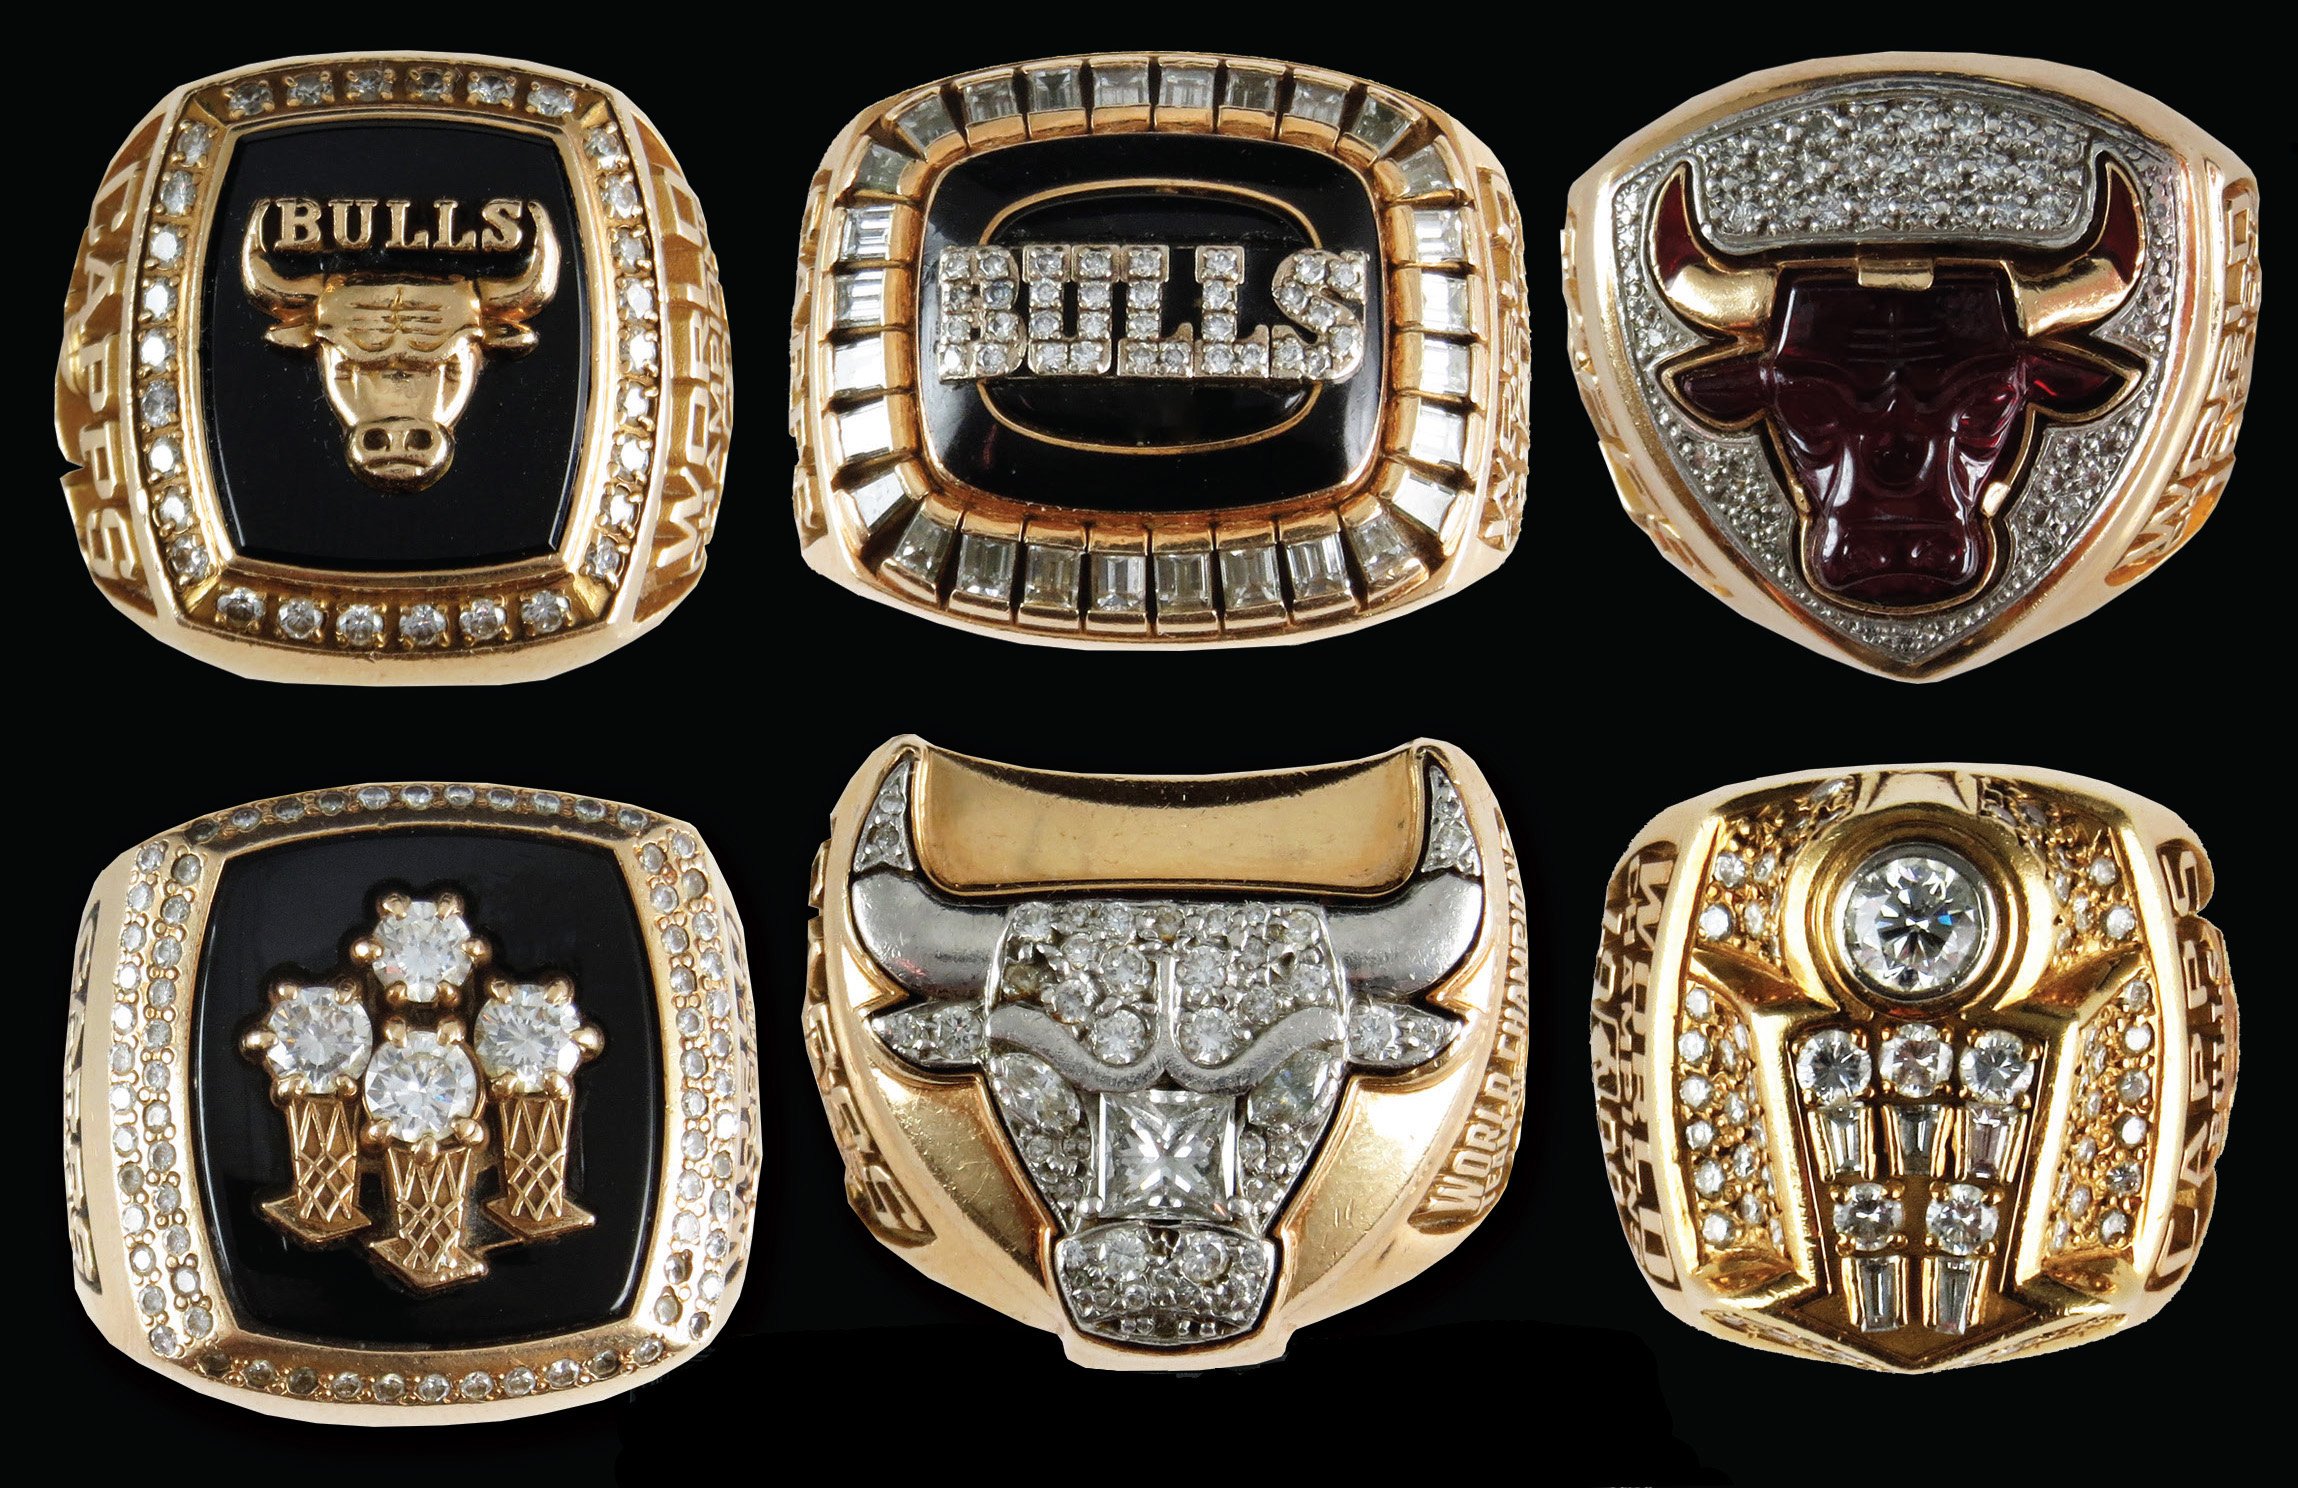 NBA championship rings: how much they're worth, what they're made